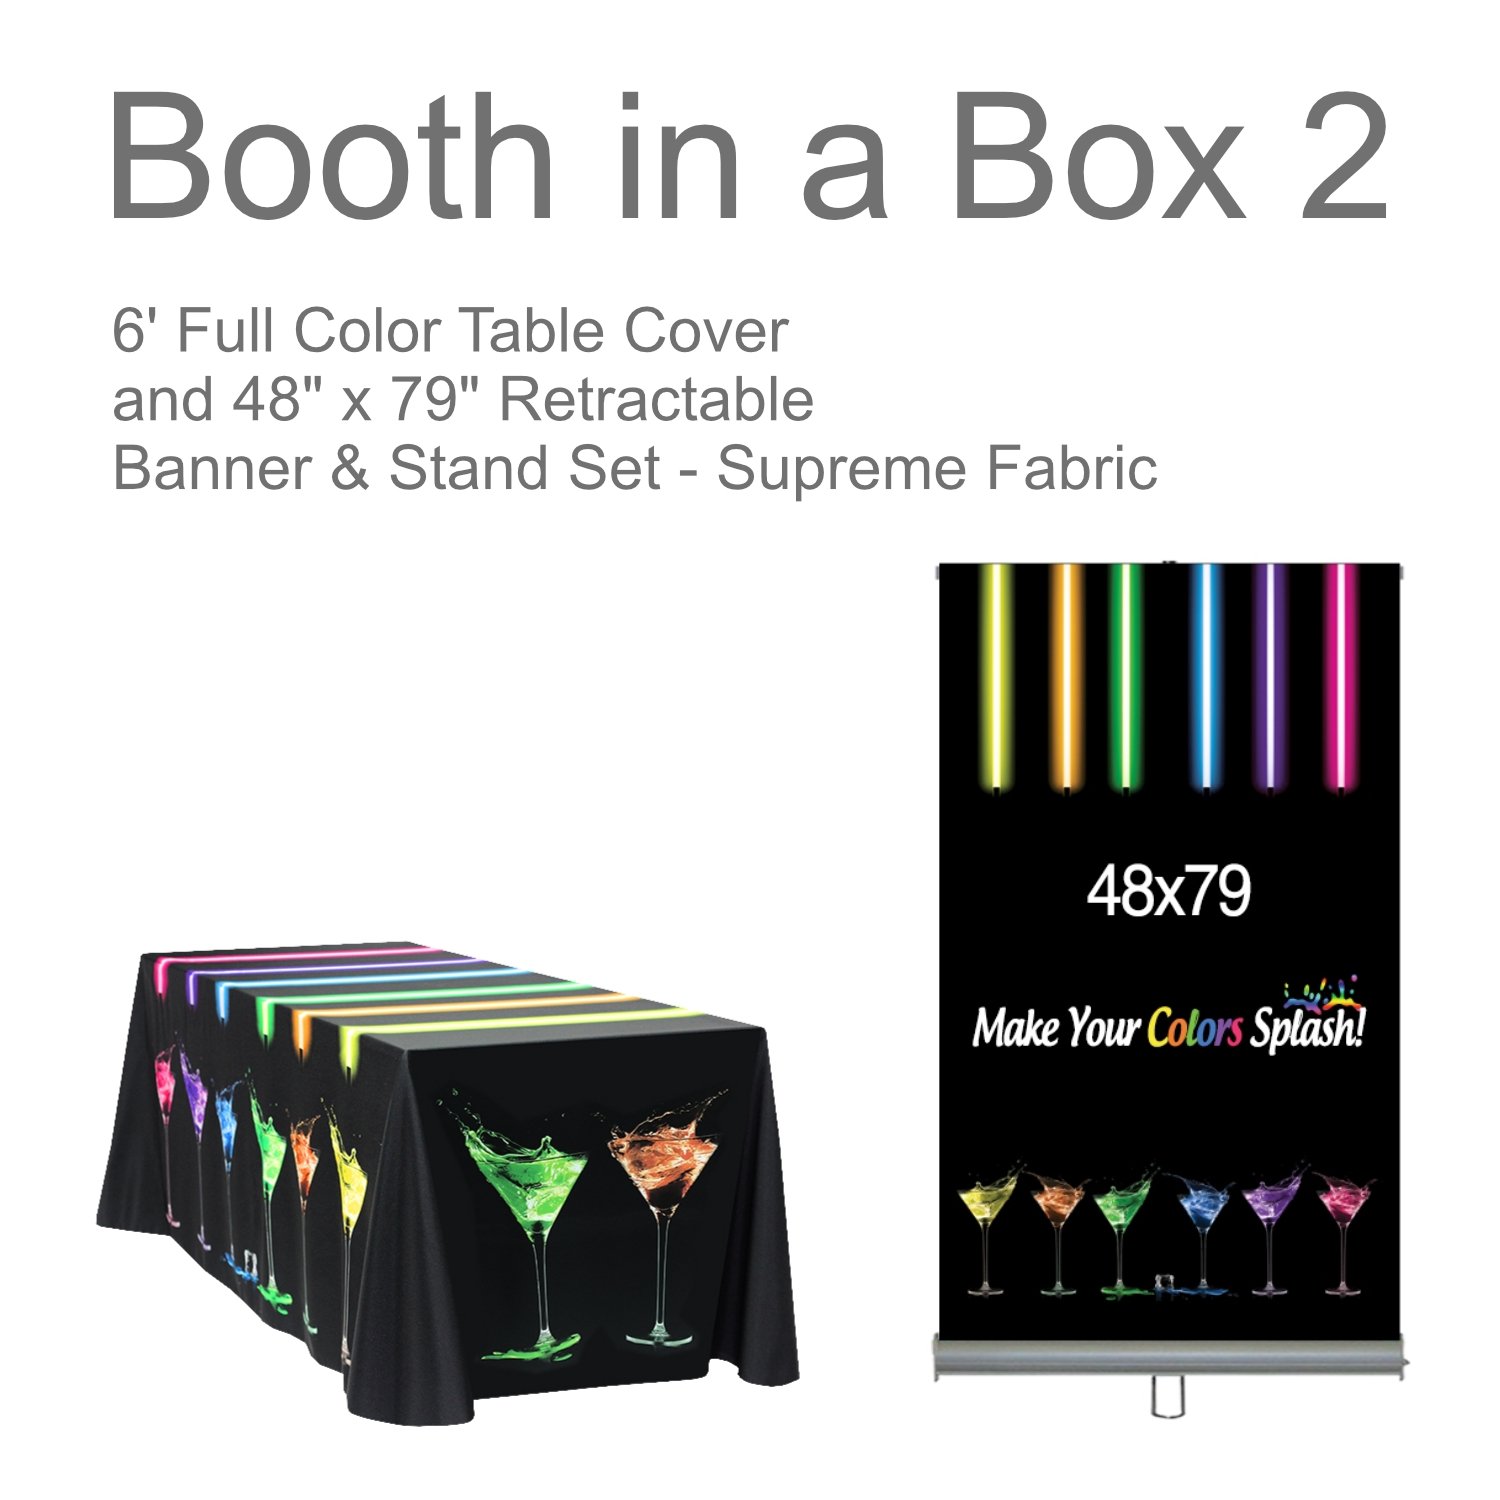 Booth In a Box 2